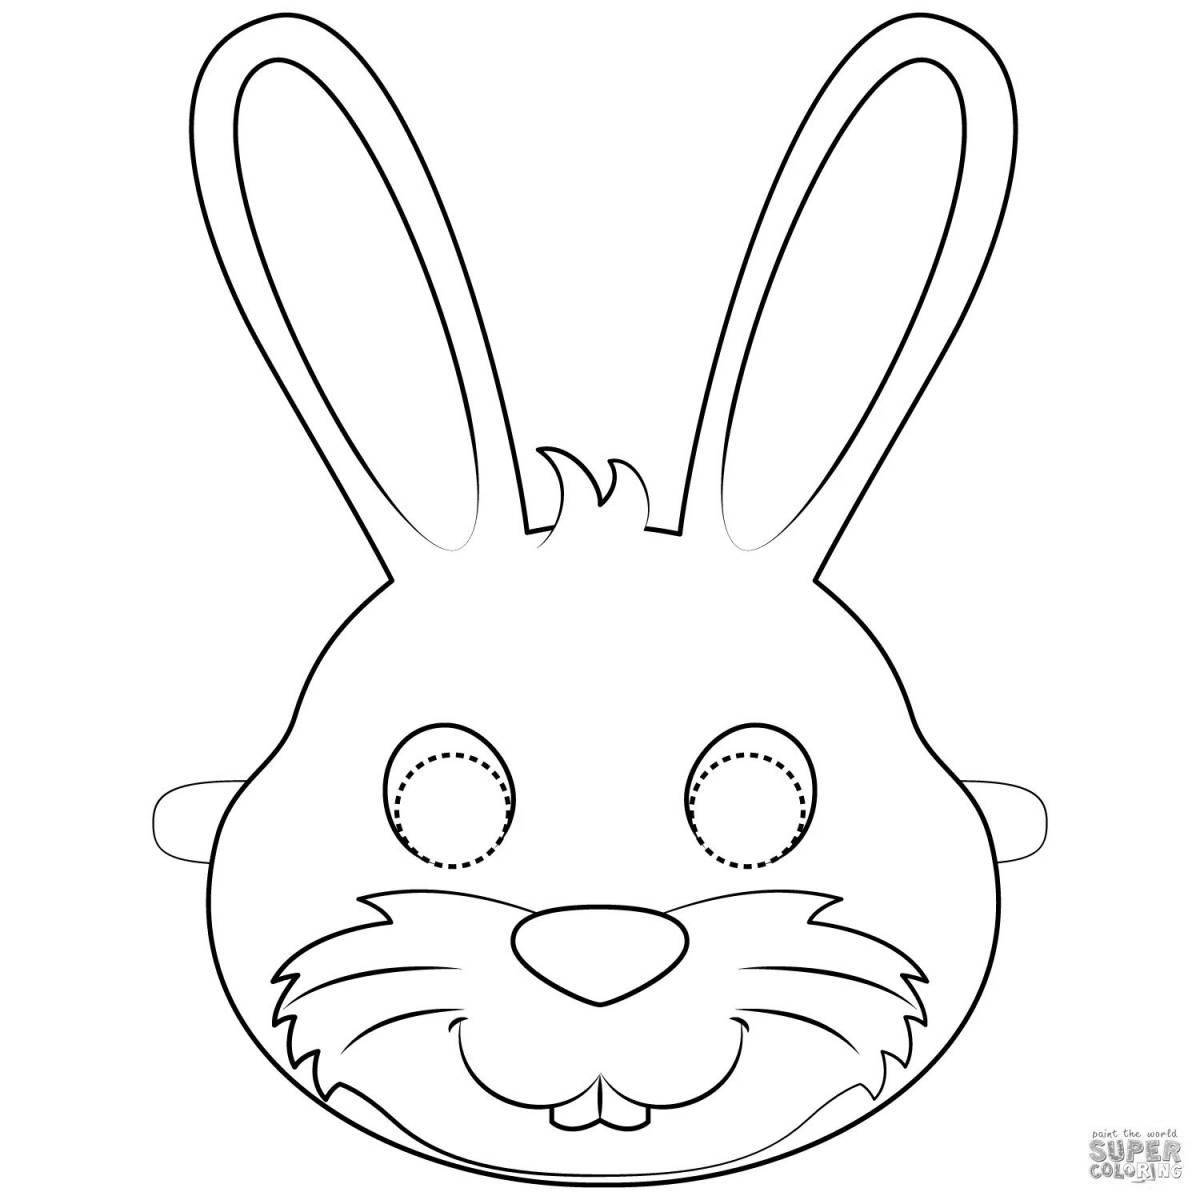 Coloring book playful animal mask for kids